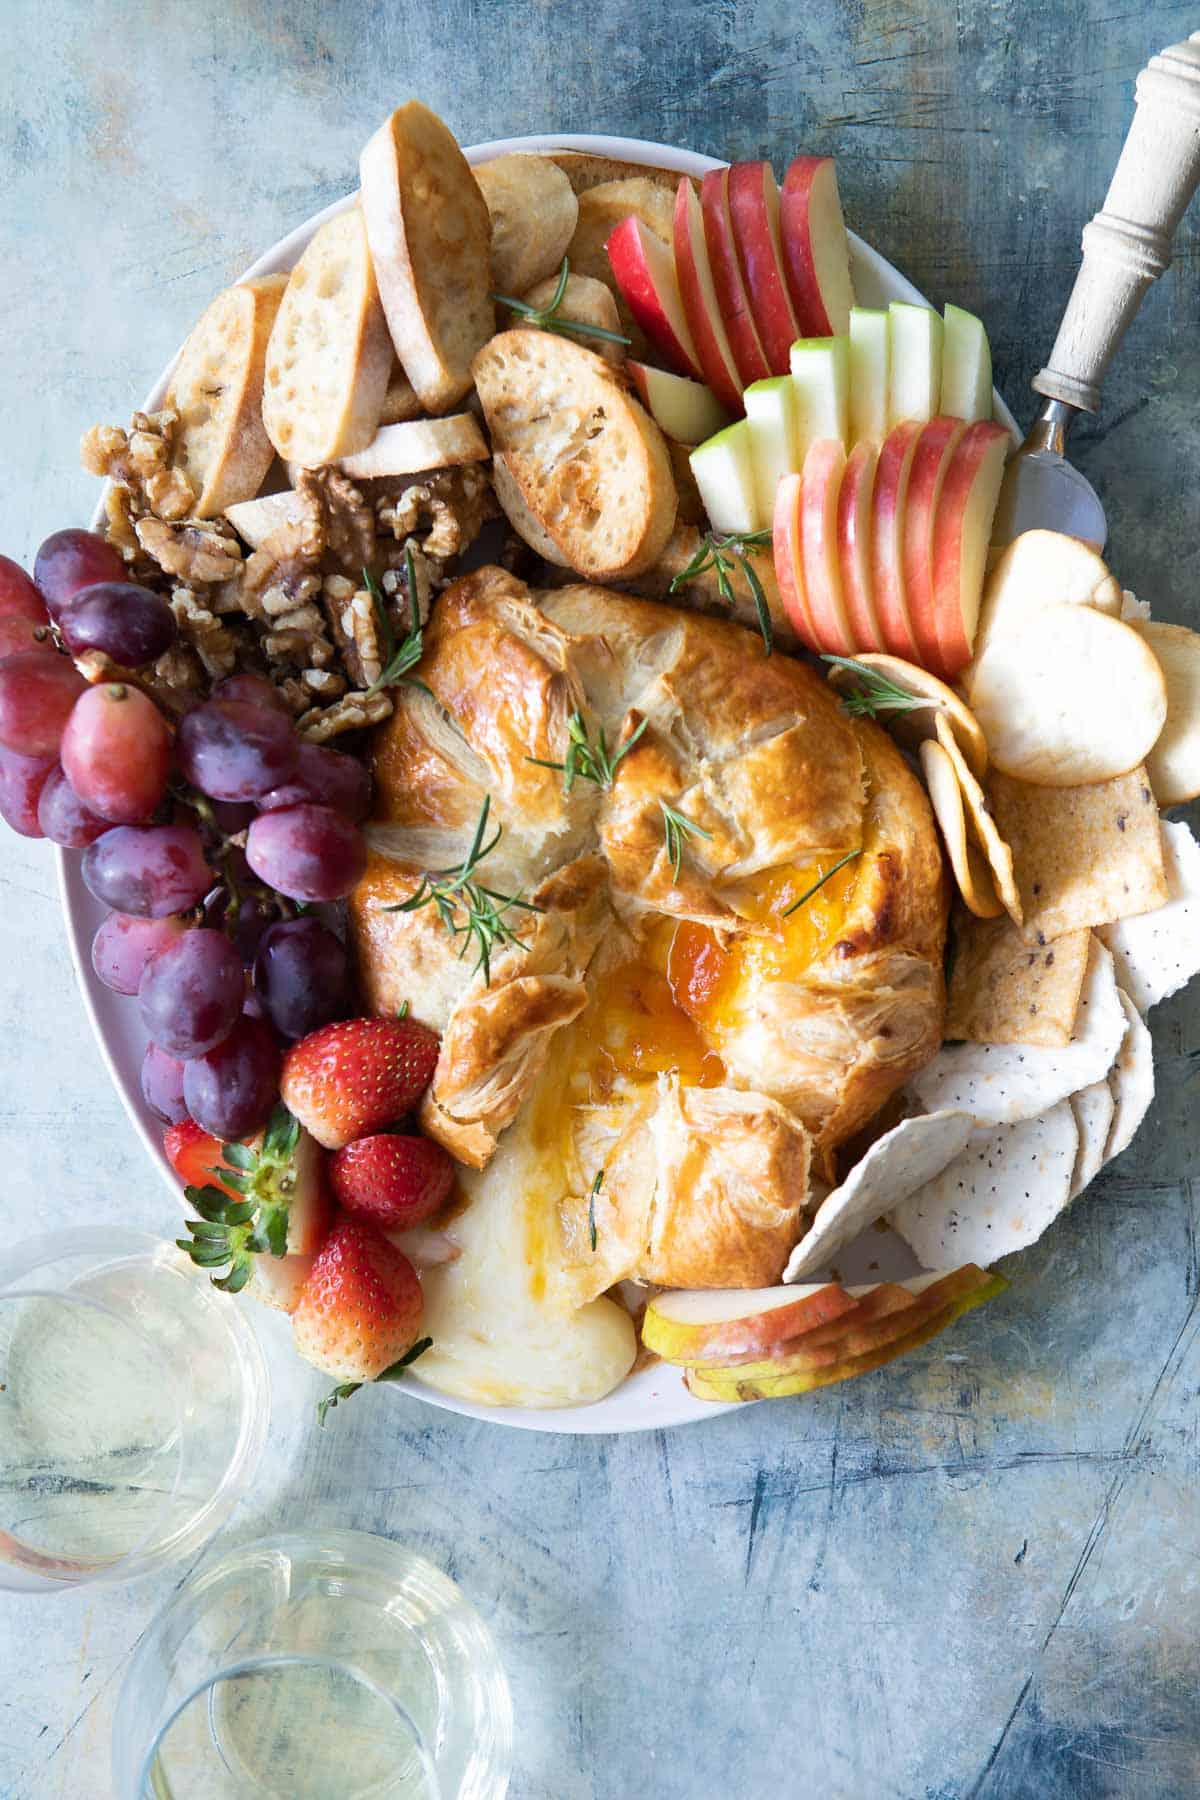 Baked brie wrapped in puff pastry served with fruit and crostini.